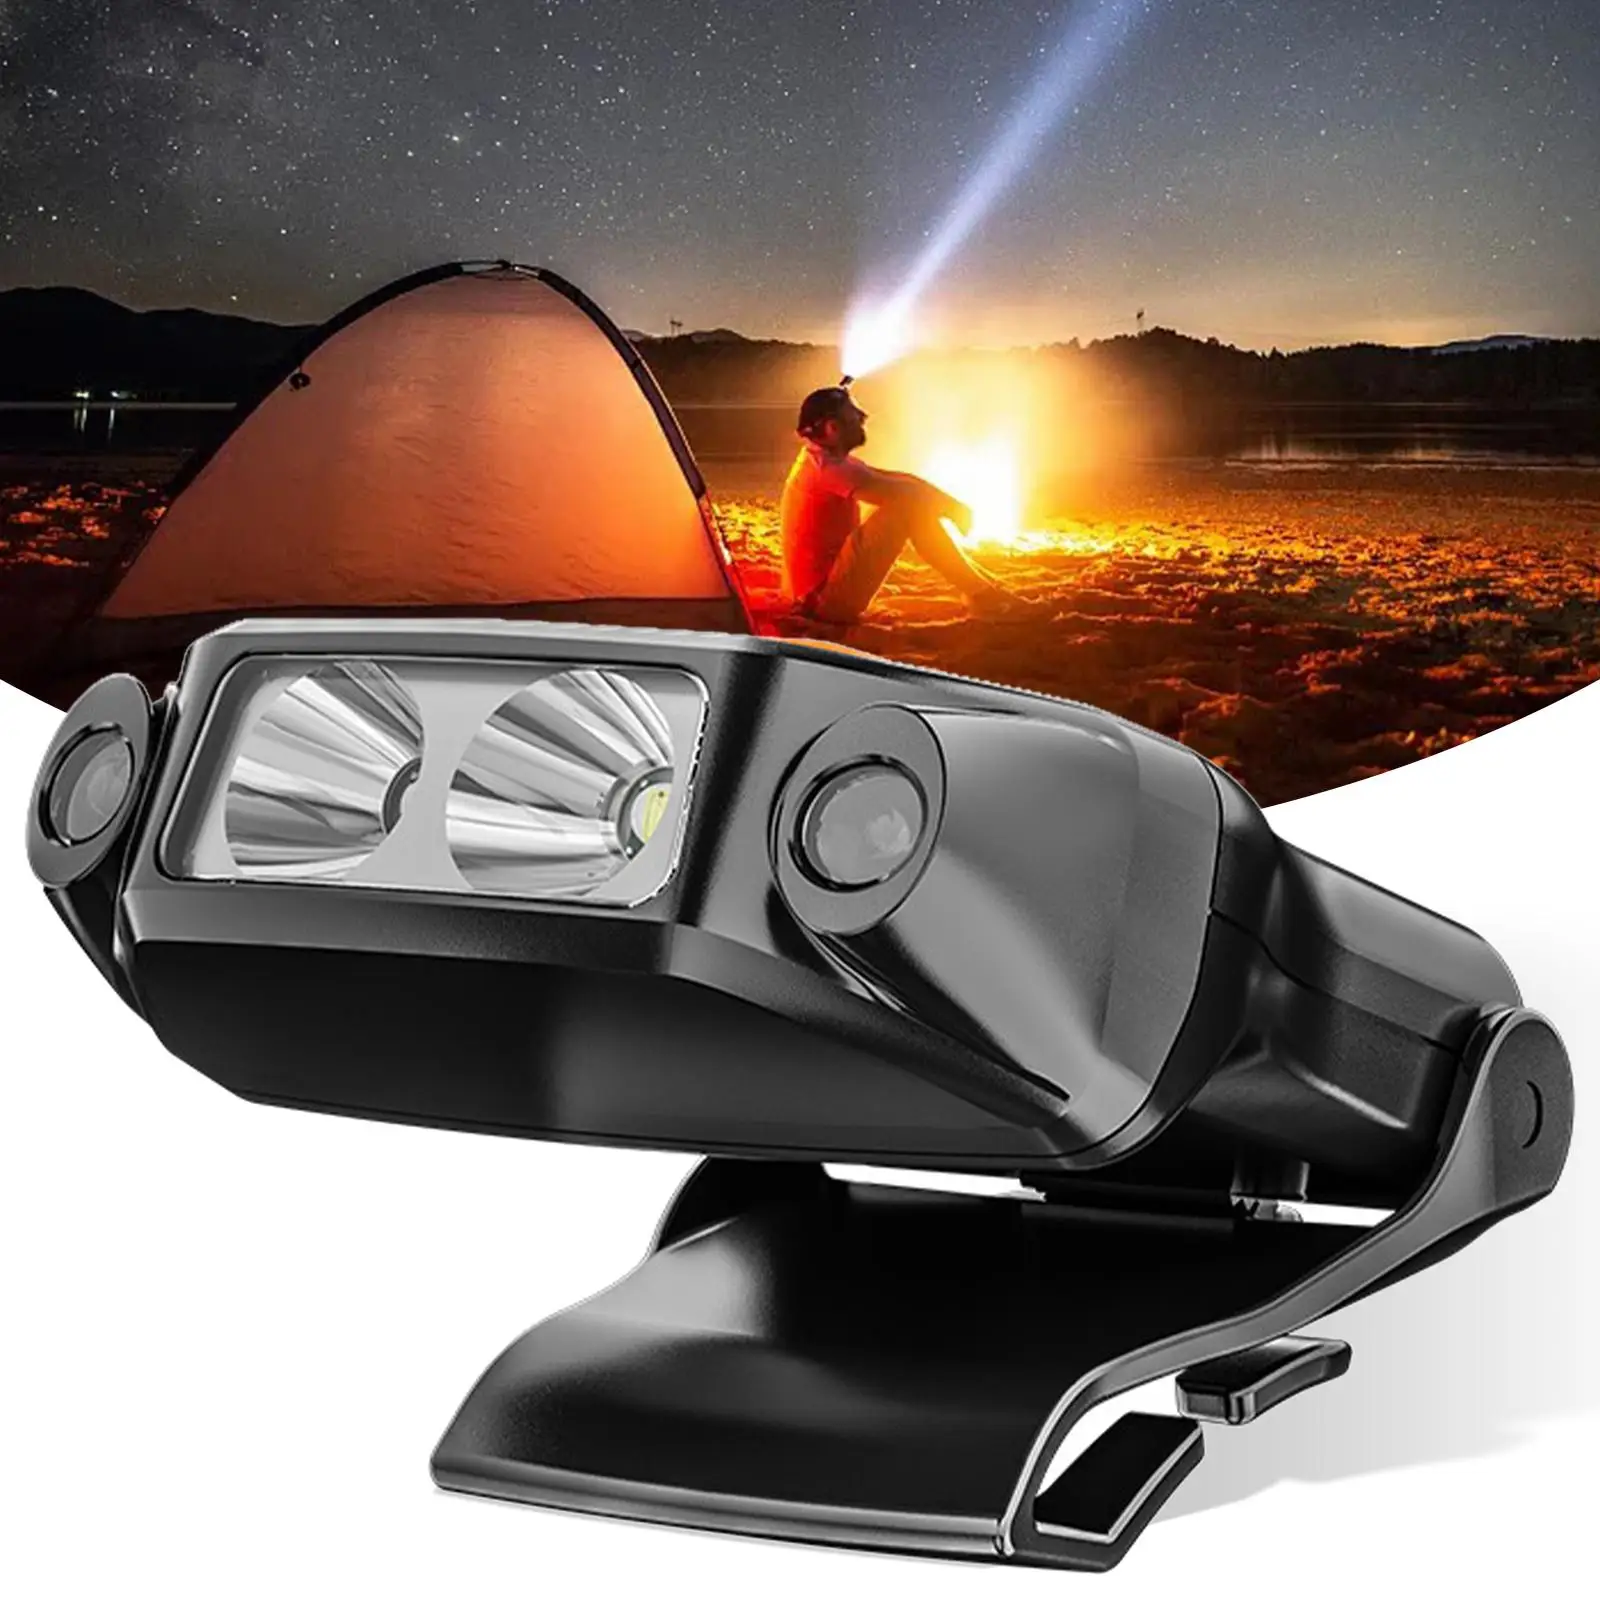 LED Headtorch Smart Sensor Clip-on Headlight Rechargeable Headtorch